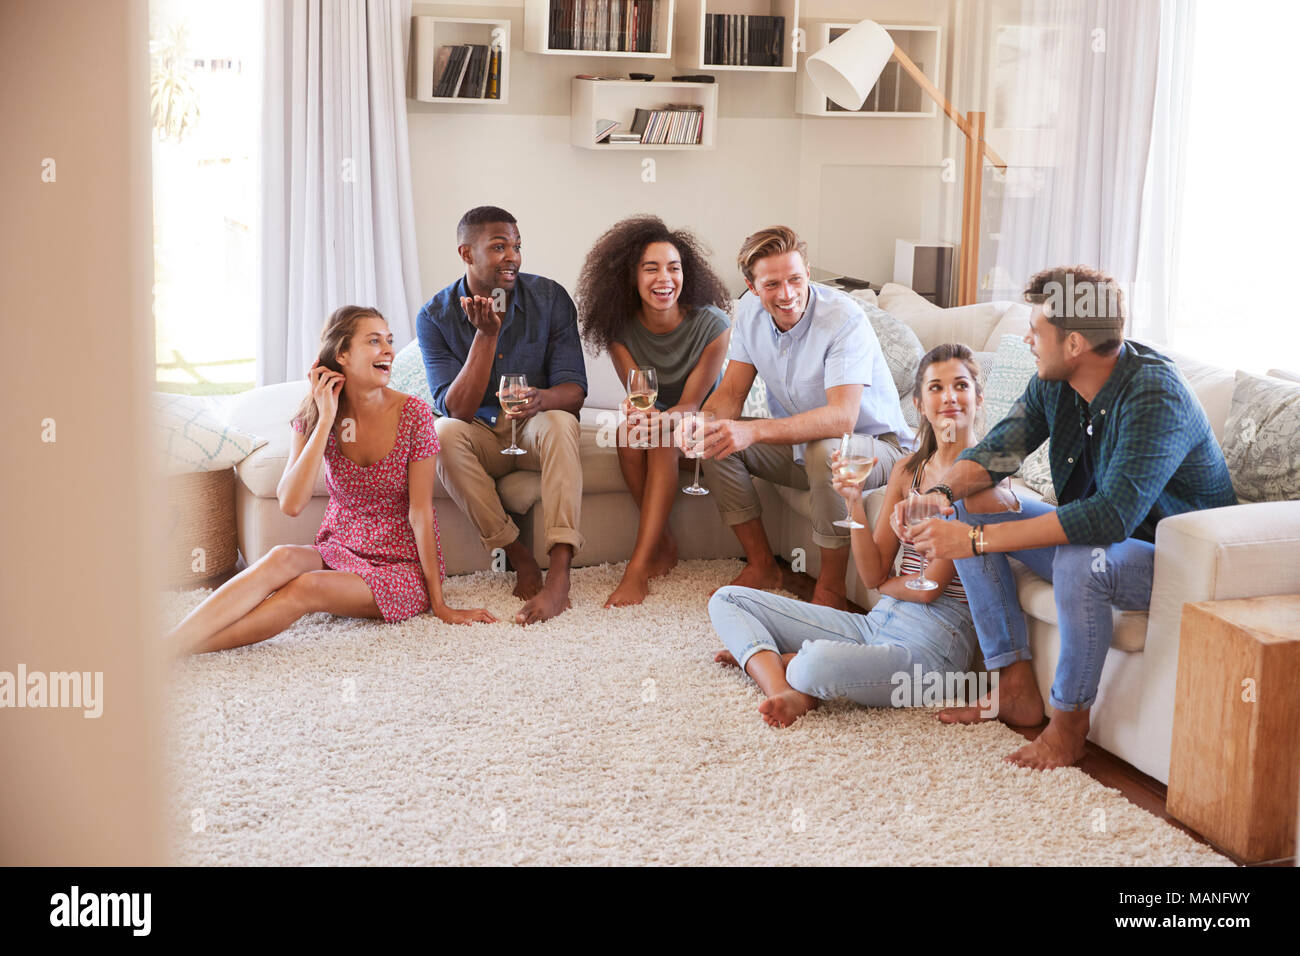 Group Of Friends Relaxing At Home And Drinking Wine Together Stock Photo